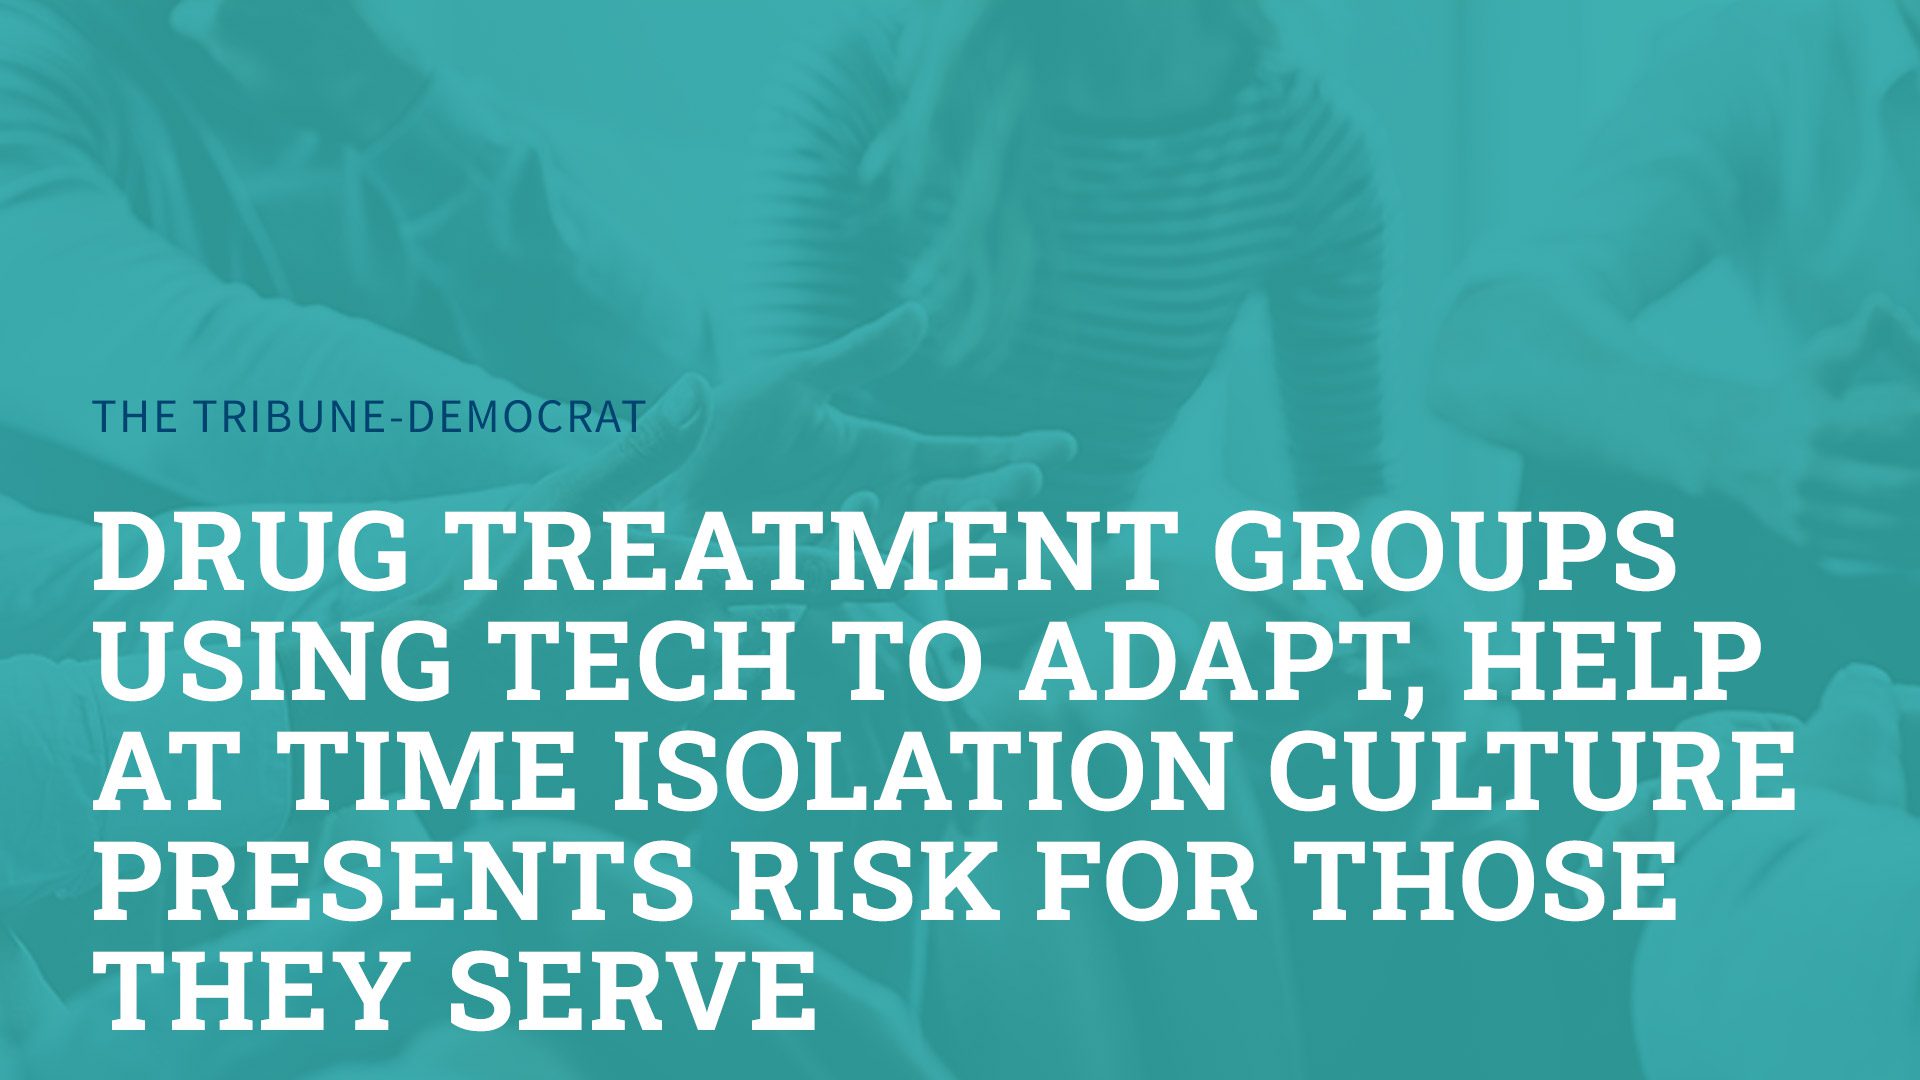 Drug treatment groups using tech to adapt, help at time isolation culture presents risk for those they serve